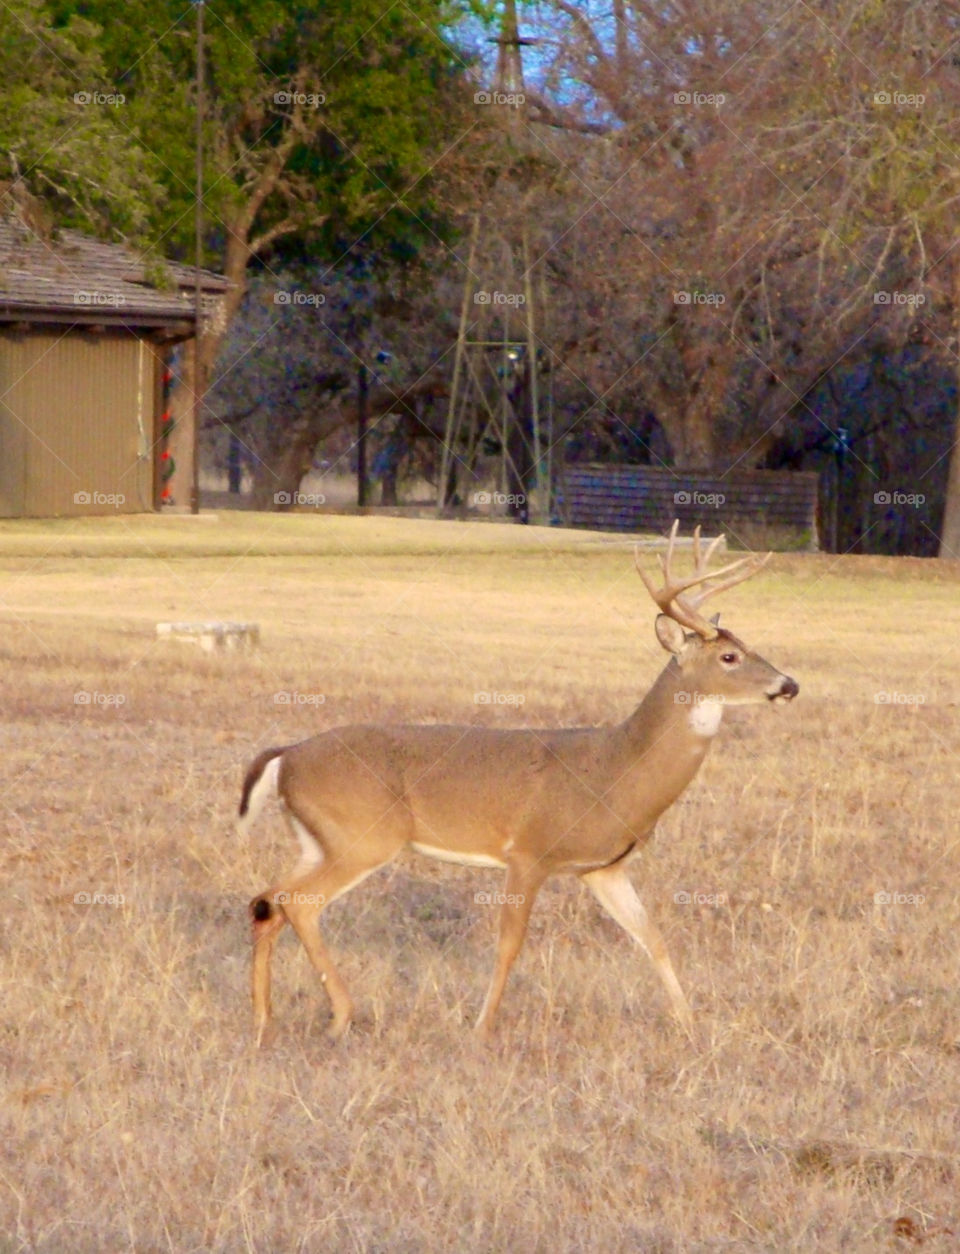 Whitetail deer in the Texas hill country